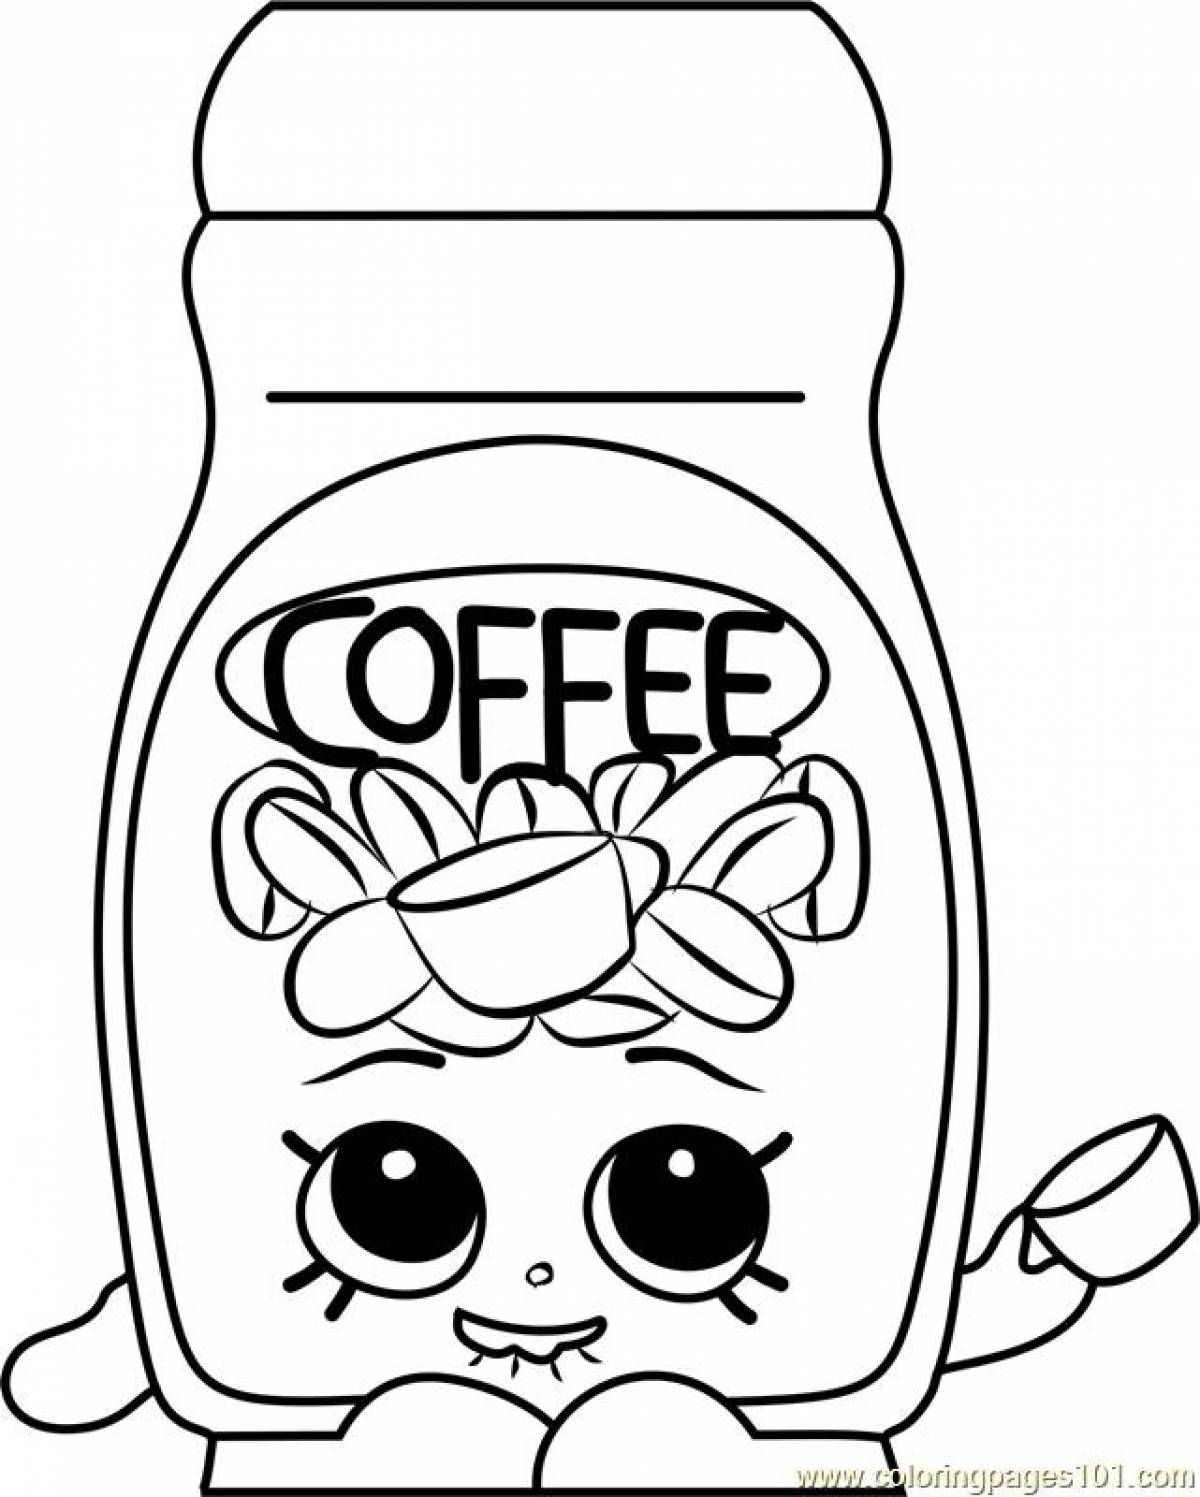 Glitter coffee coloring page